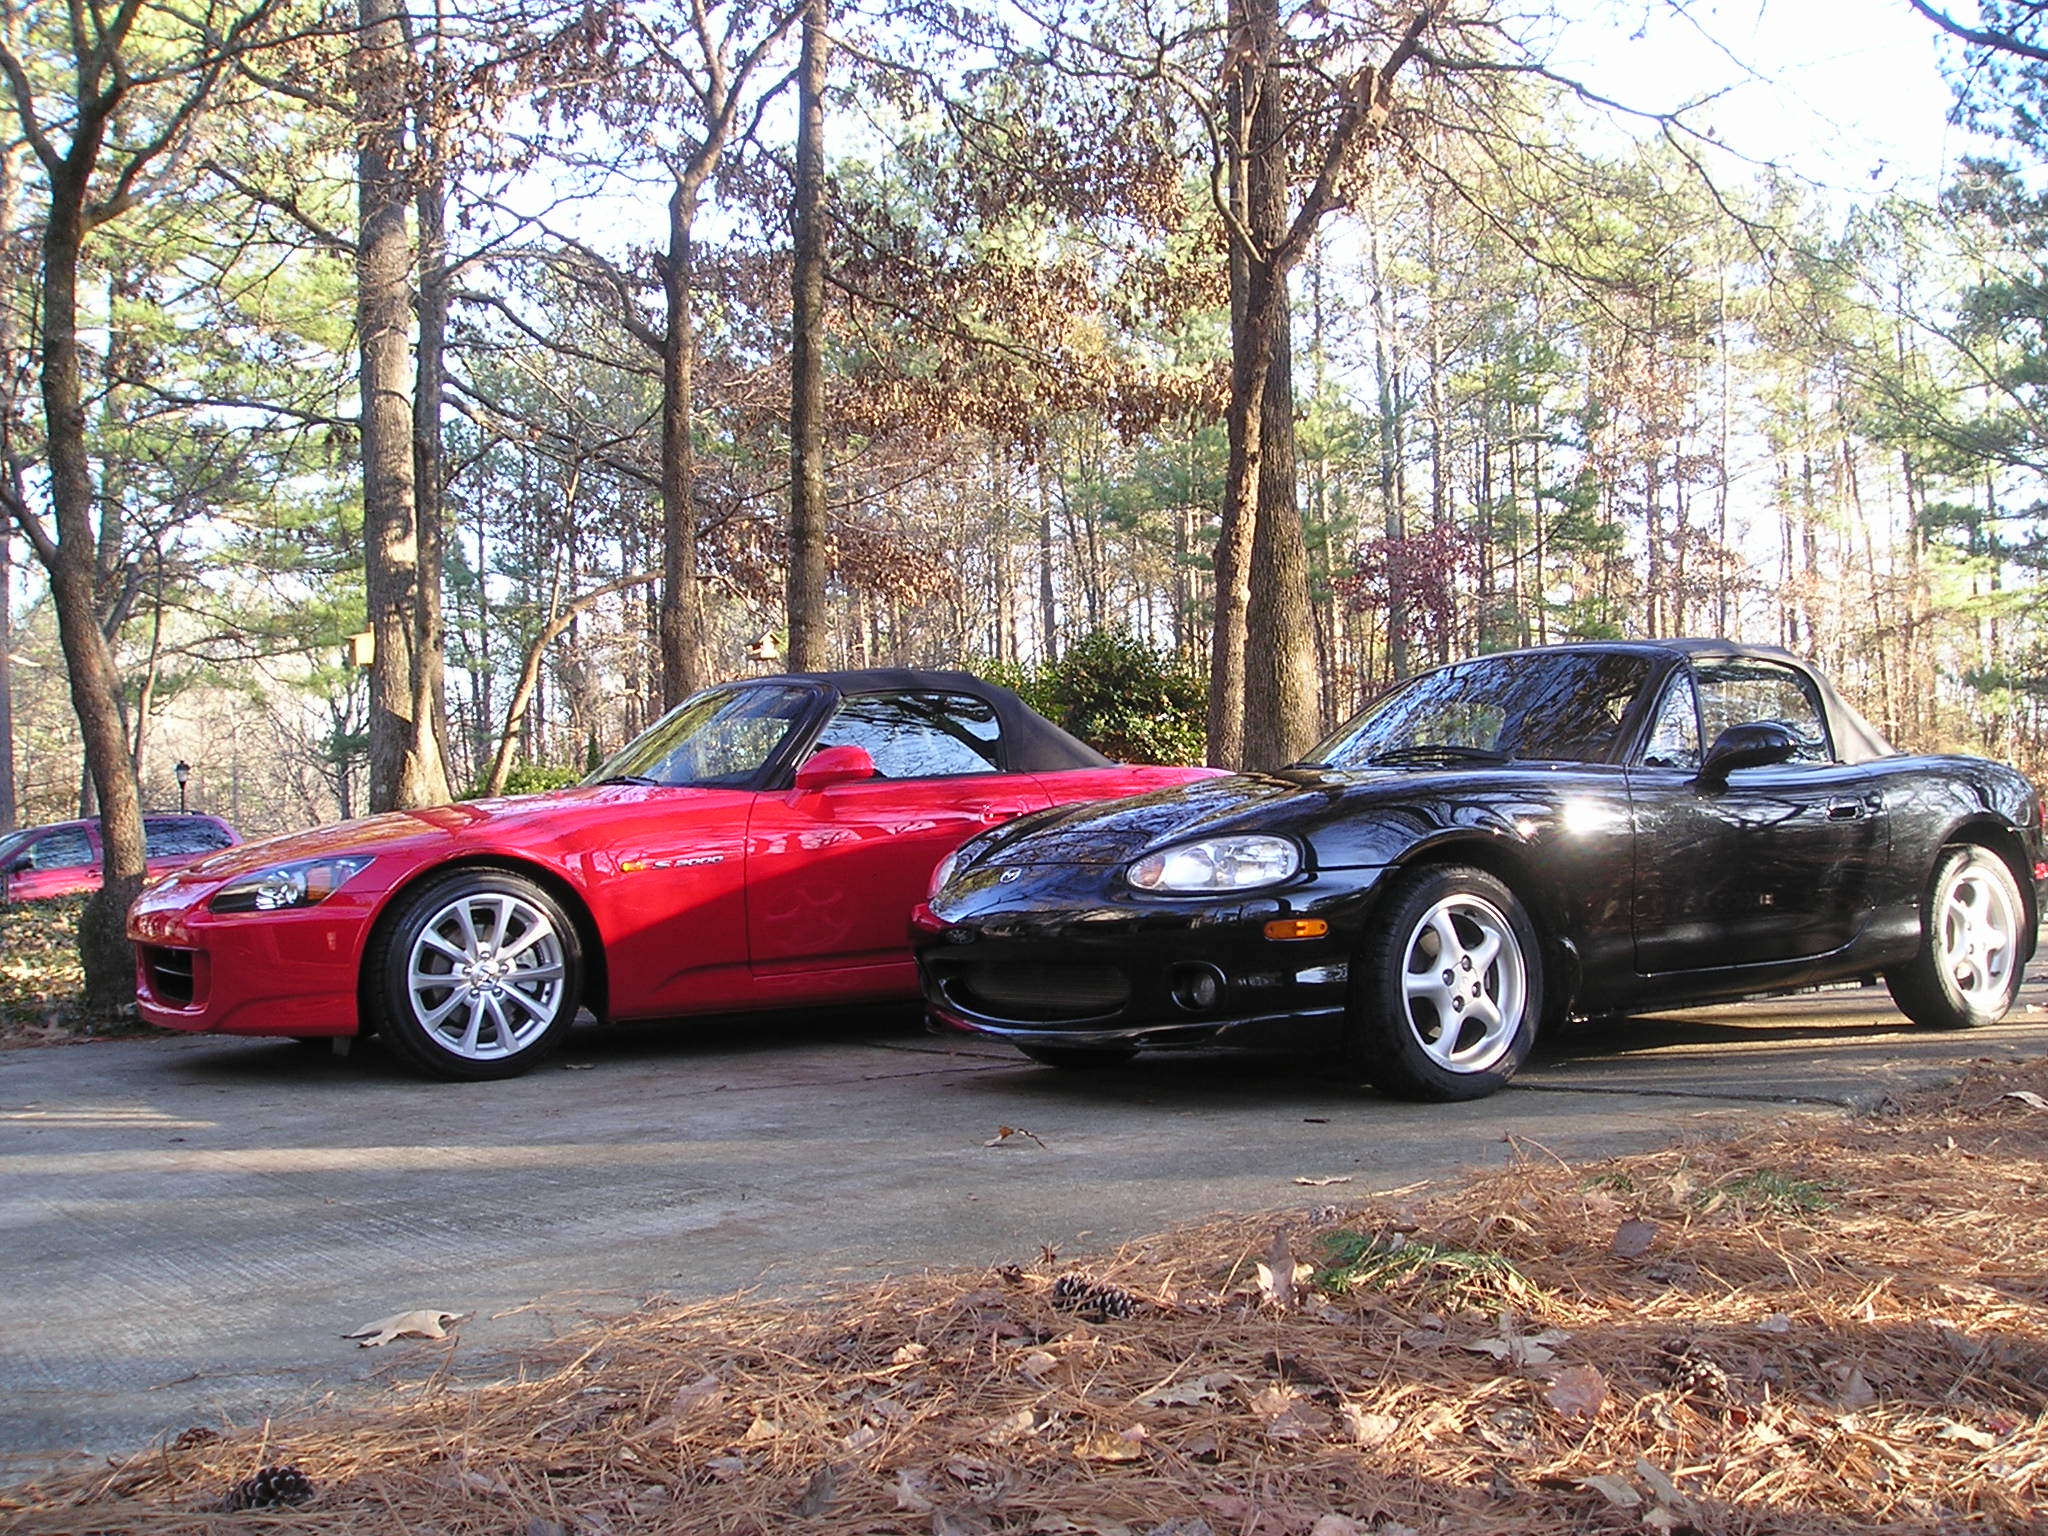 When I sold the Miata, I replaced it with an S2000.